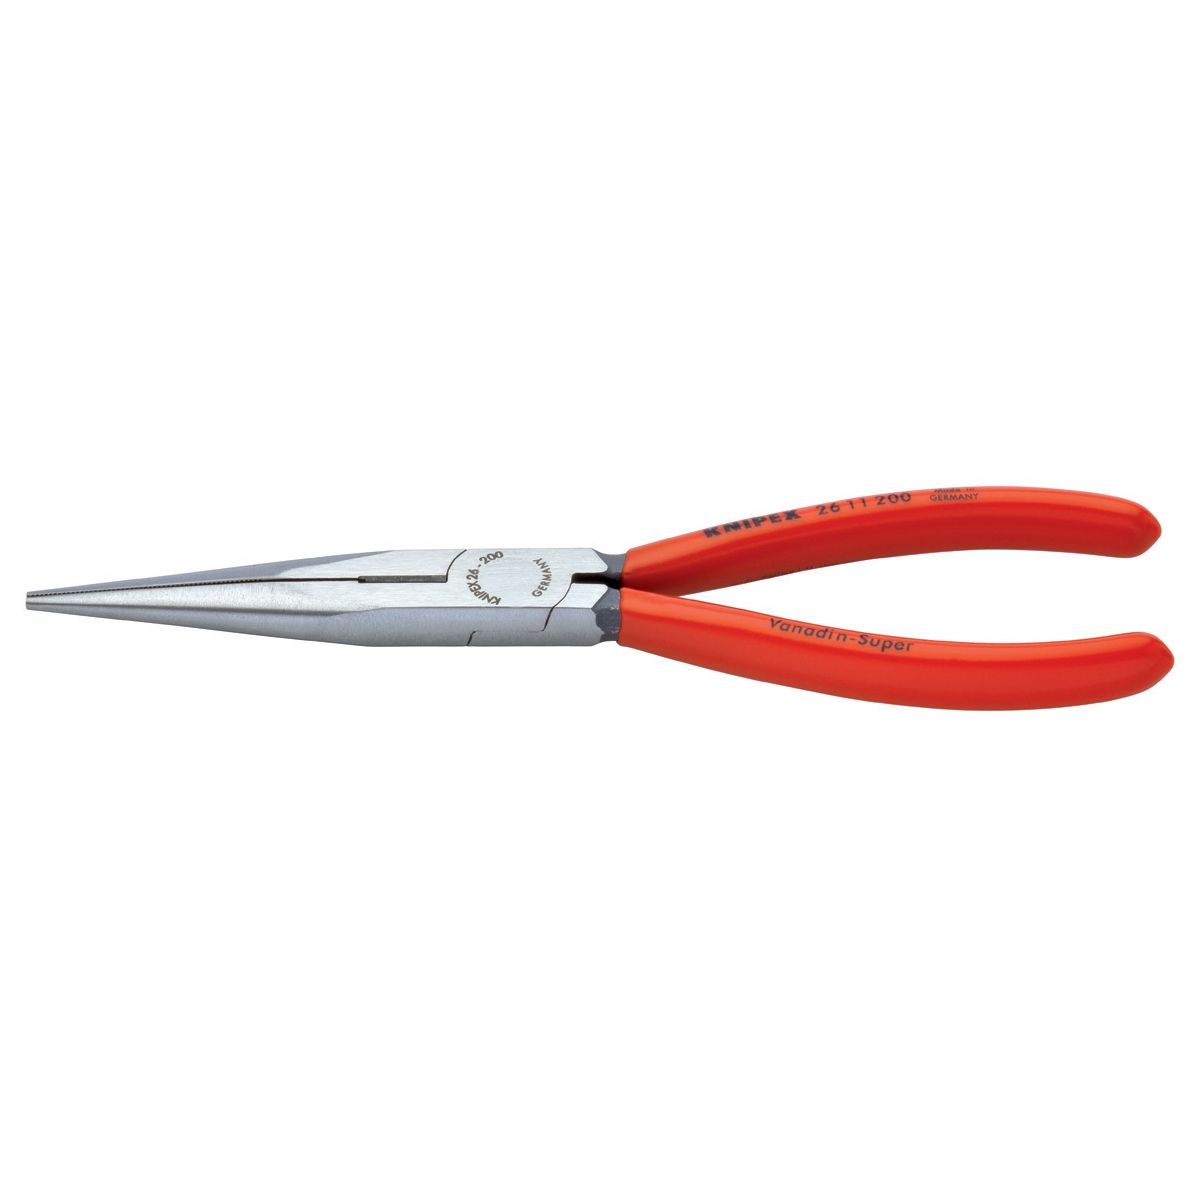 8" LONG NOSE PLIERS CARDED